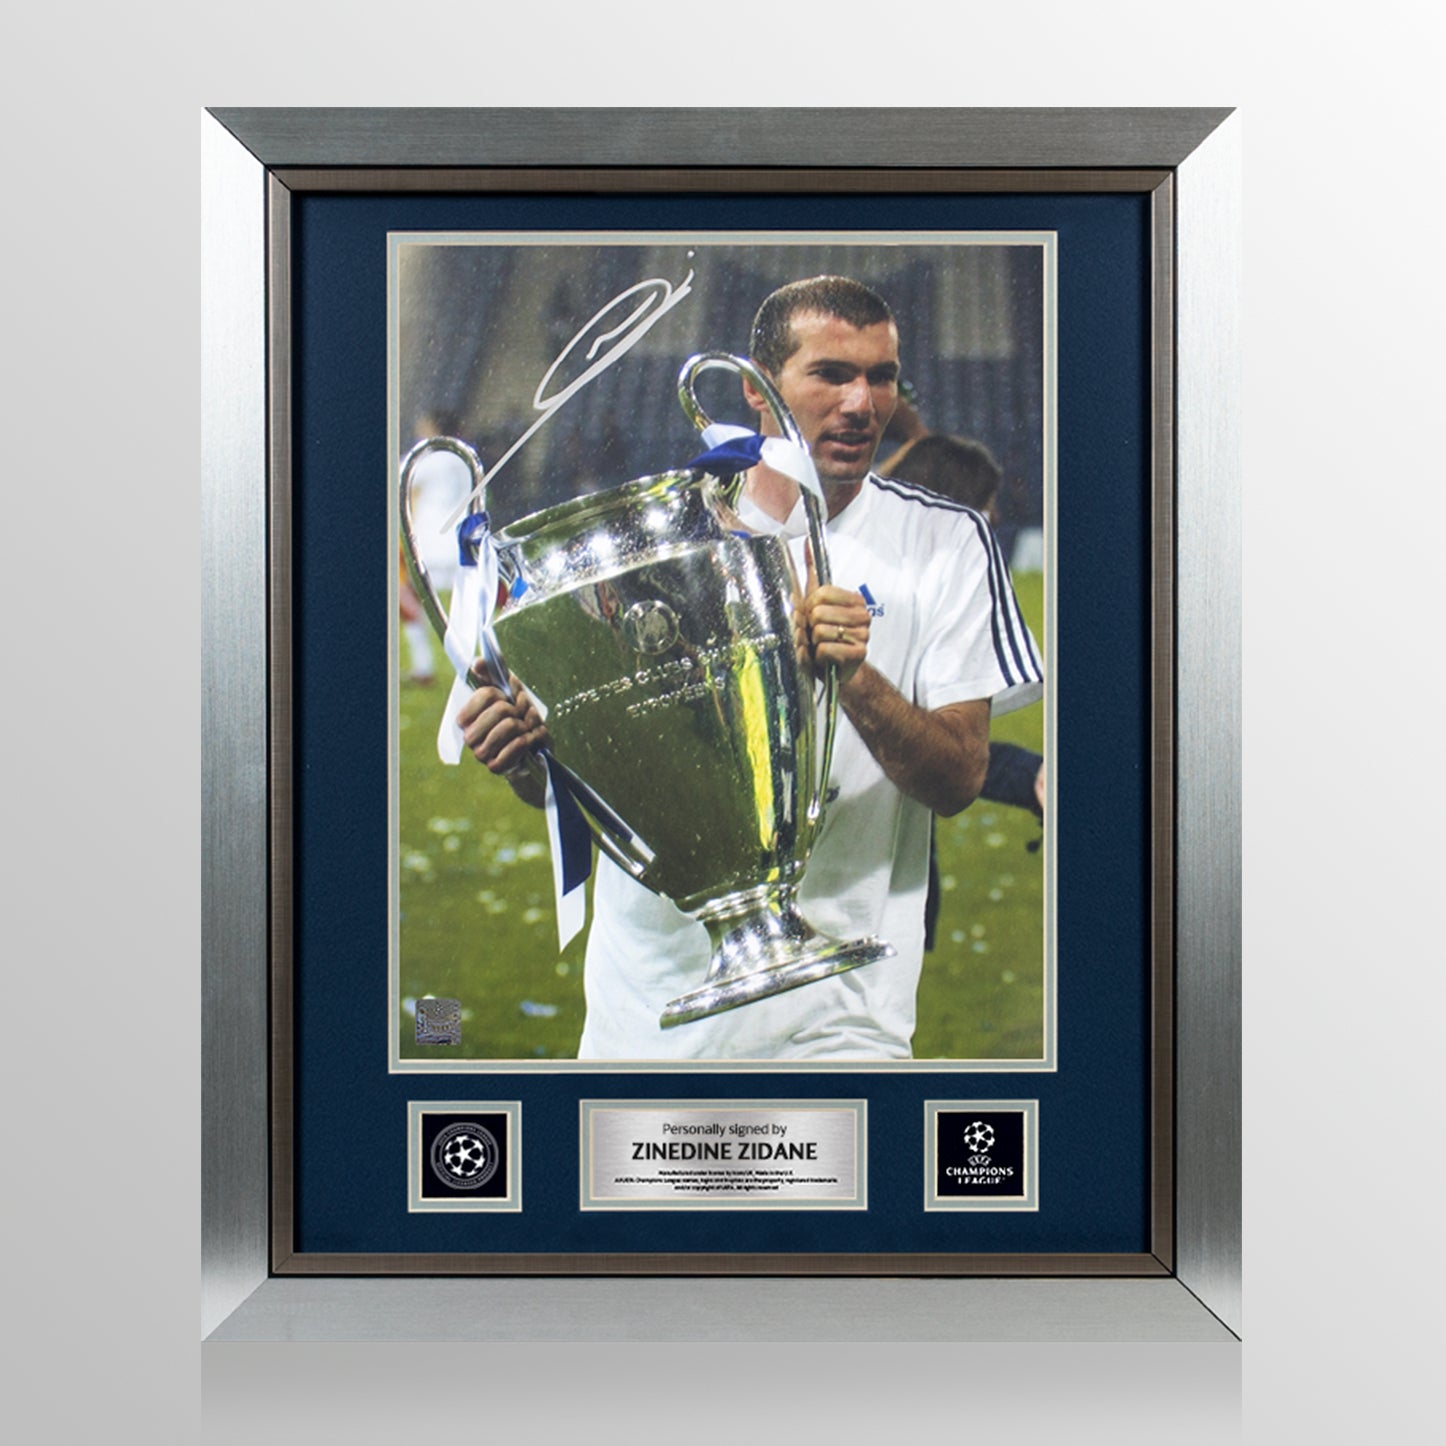 Zinedine Zidane Official UEFA Champions League Signed and Framed Real Madrid Photo: 2002 UEFA Champions League Winner UEFA Club Competitions Online Store